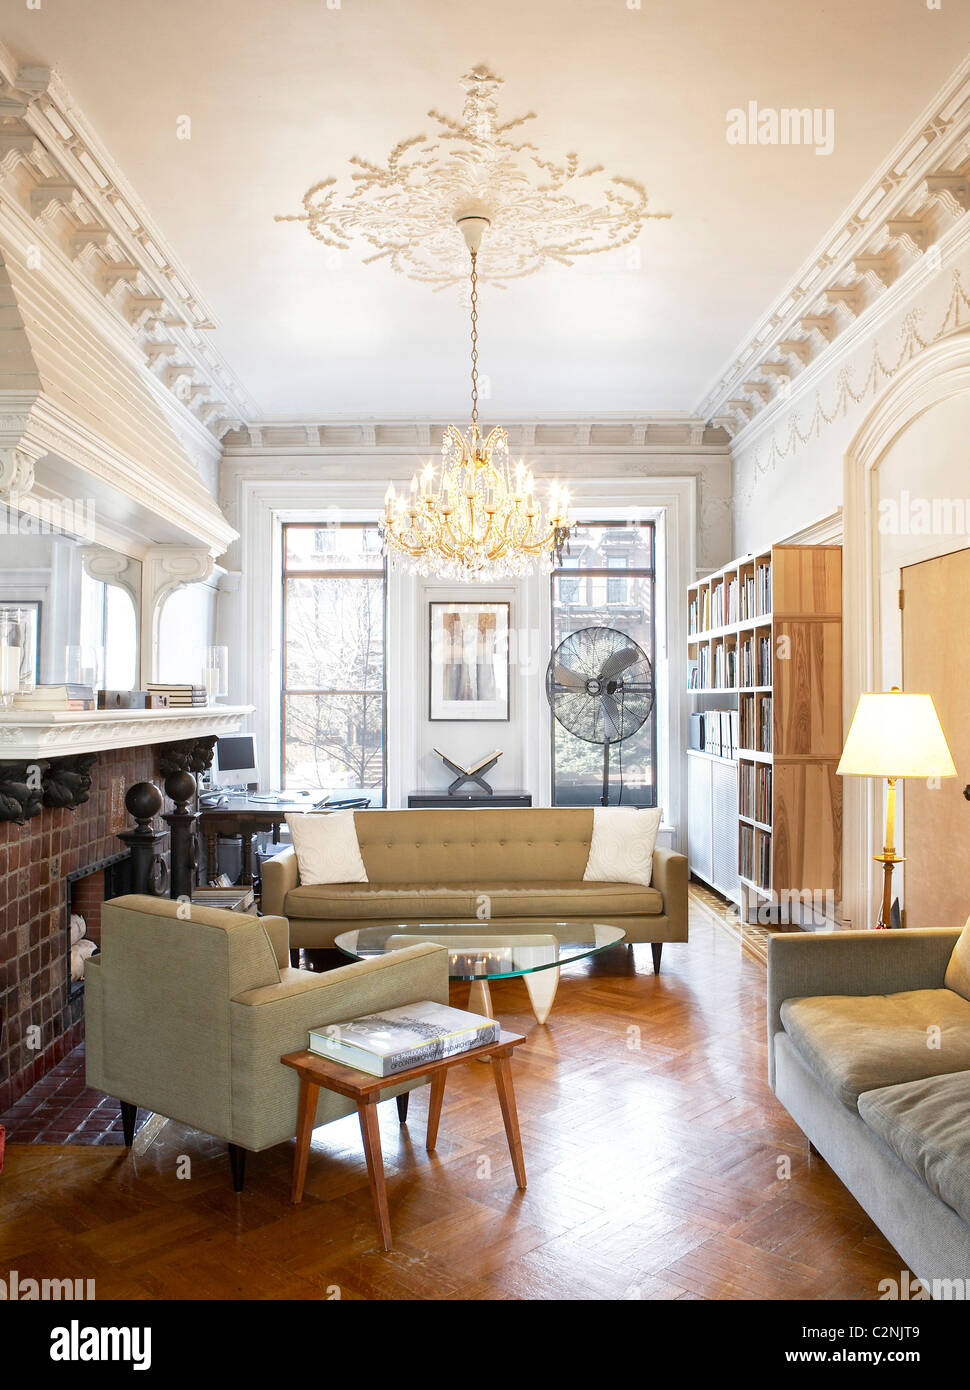 Brooklyn Brownstone Living Room With White Painted Ceiling